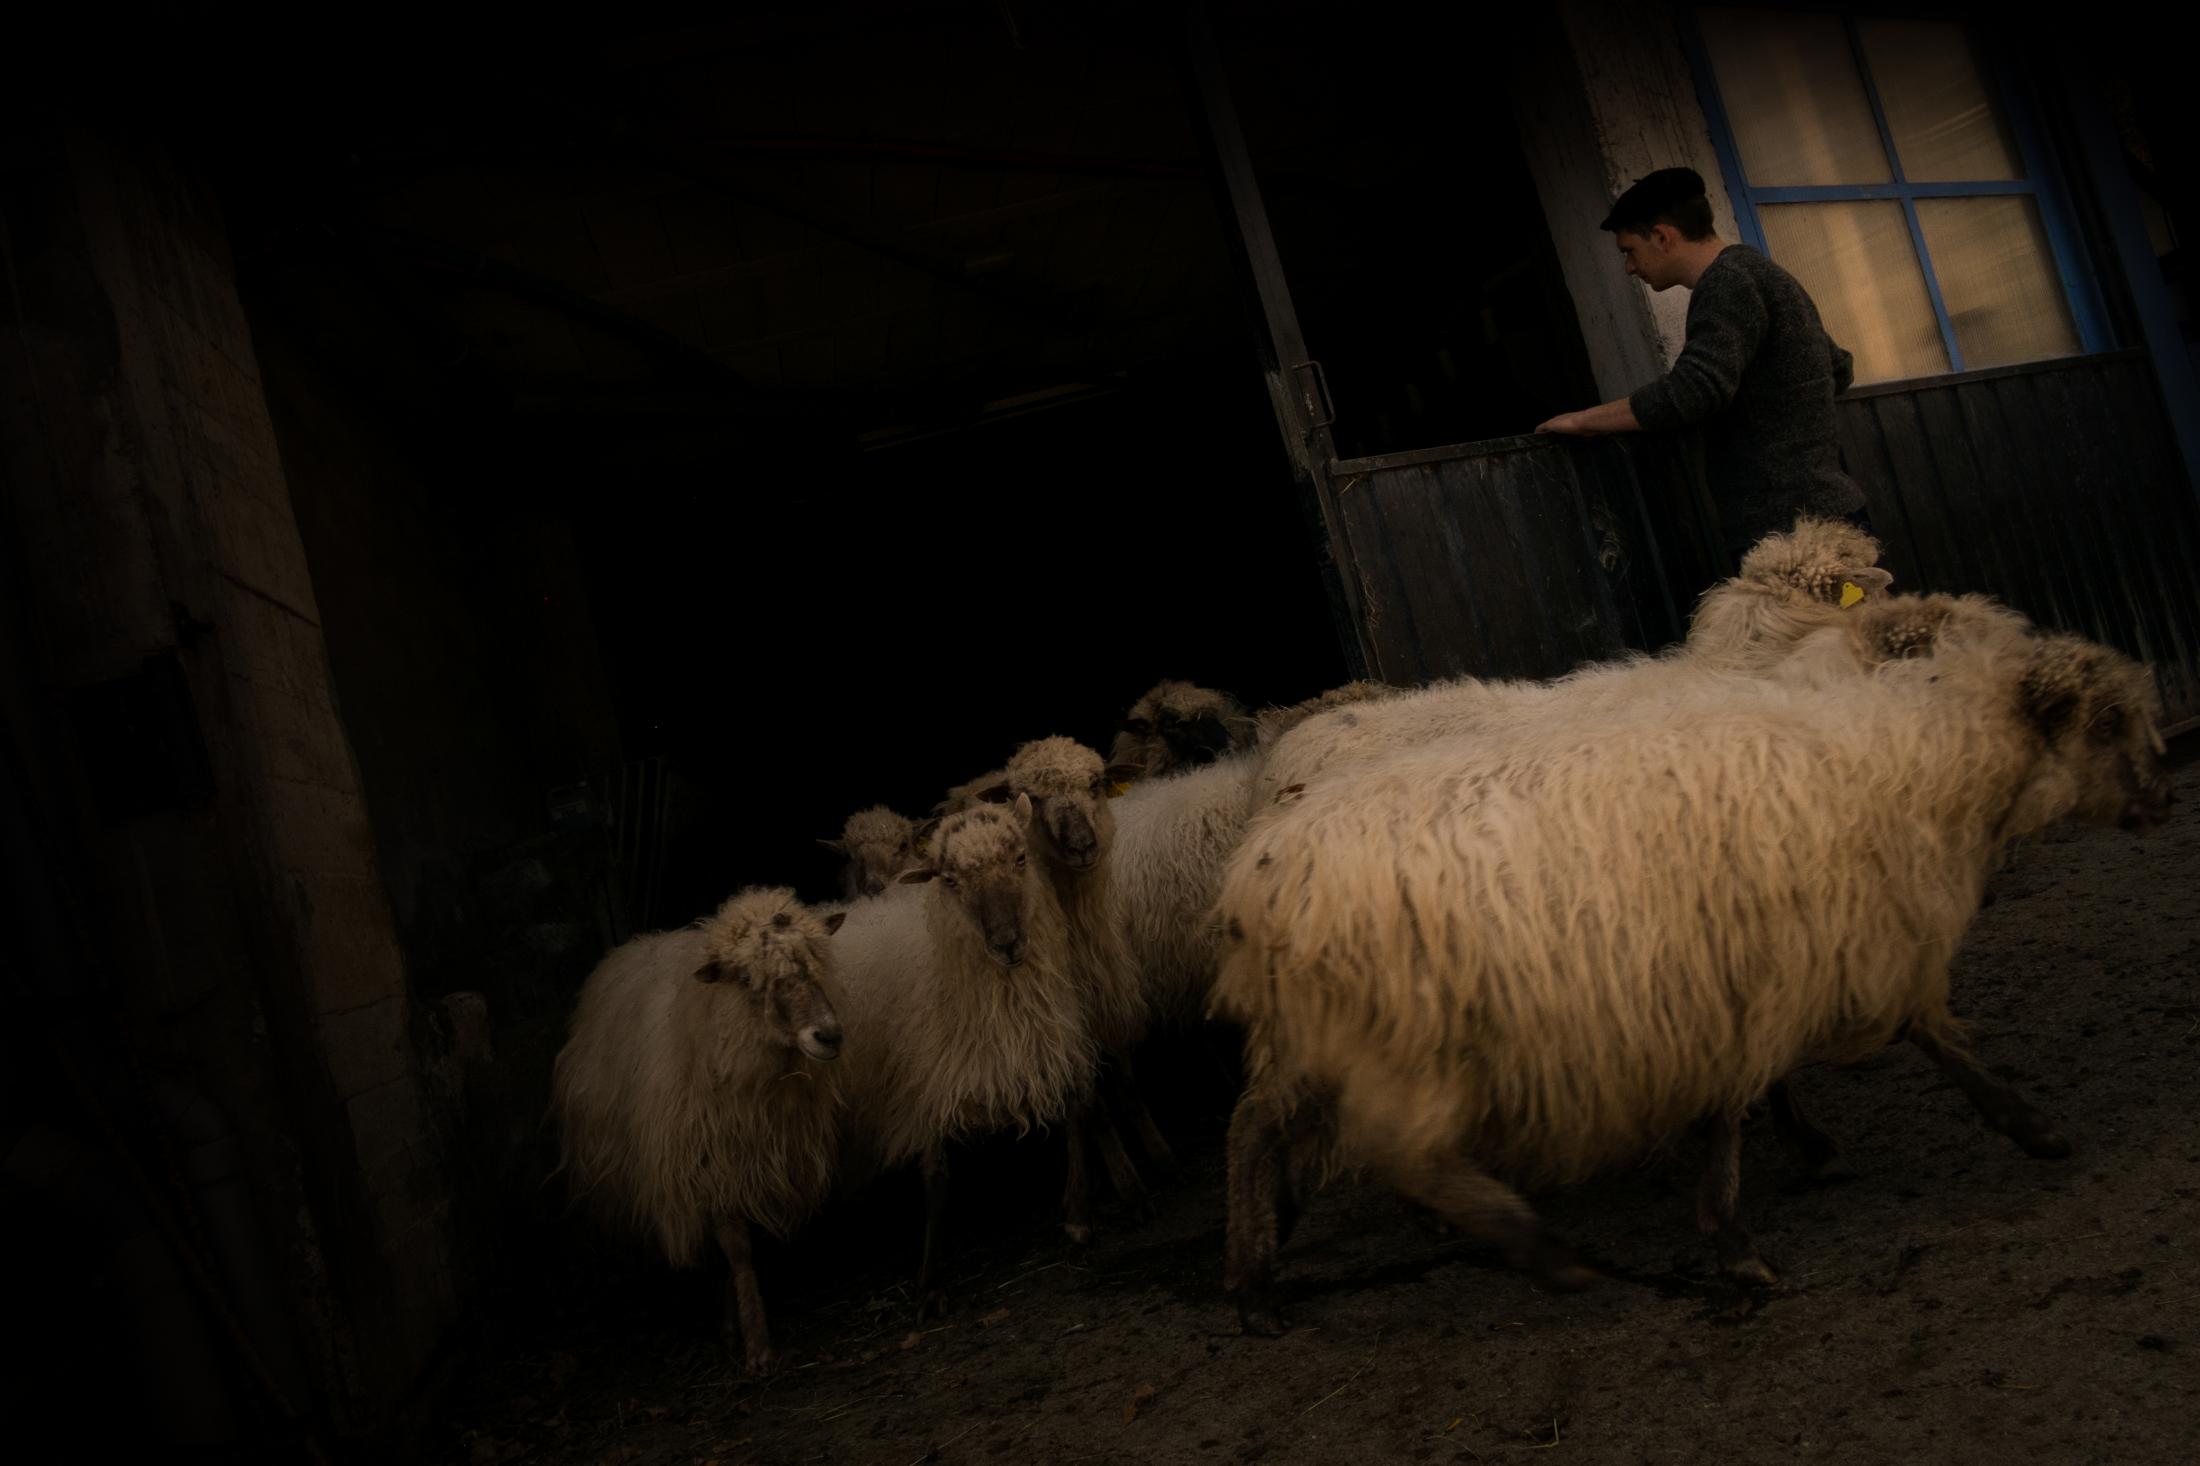 THE YOUNG BASQUE SHEPHERD -   Once the sheep are milked, they go back to the barn.  